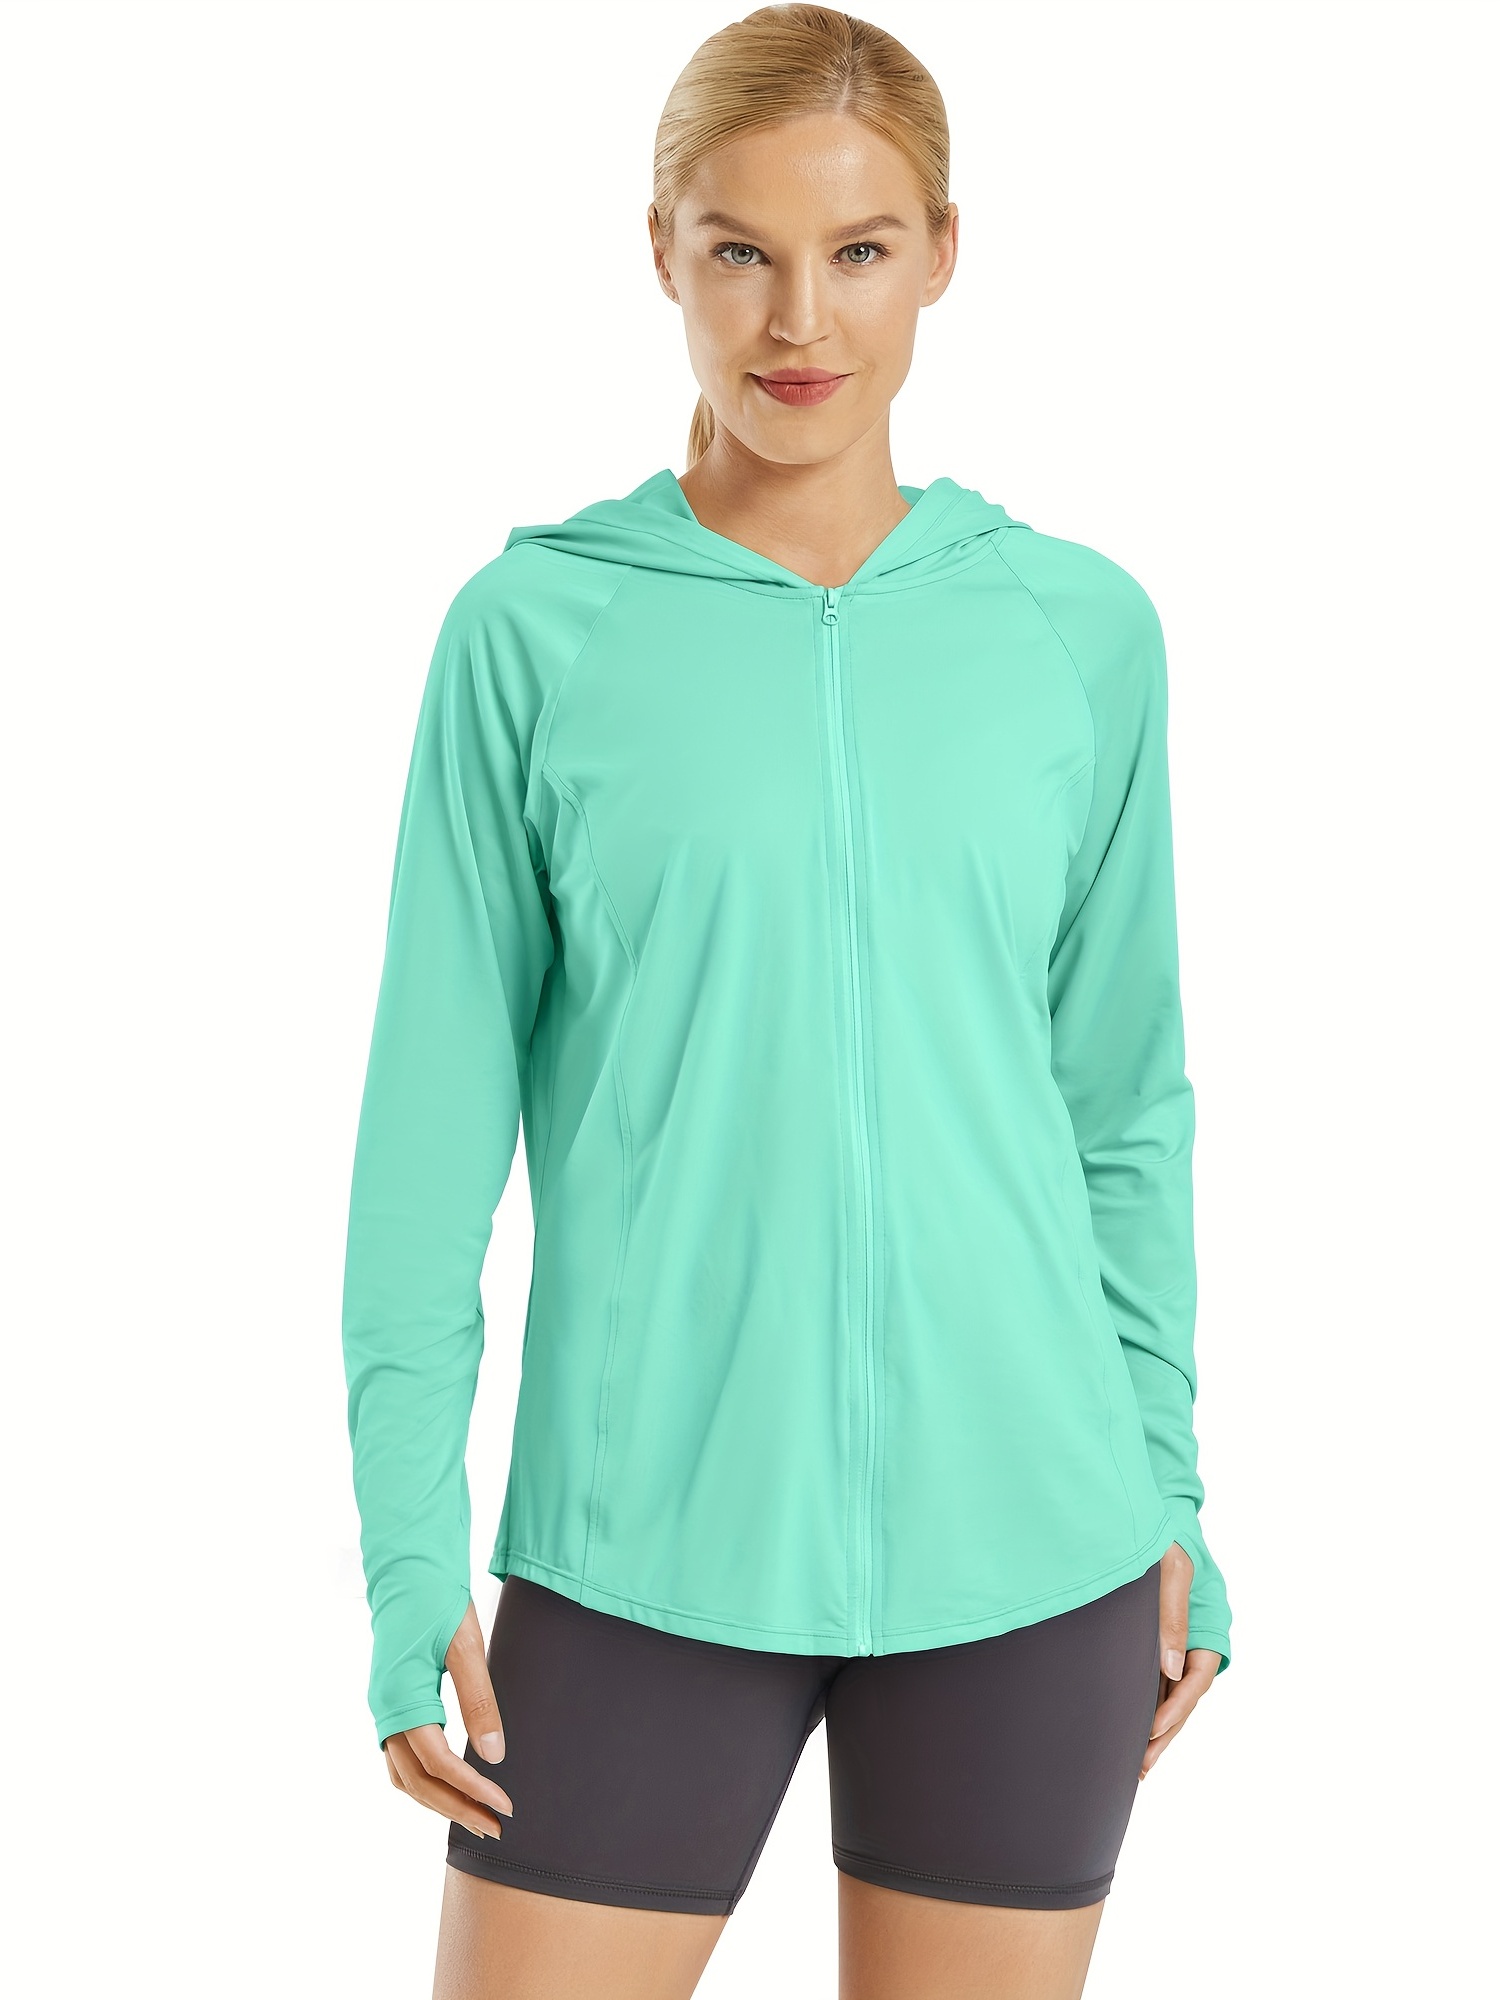 Stay Protected In Style Womens Lightweight Long Sleeve Sun